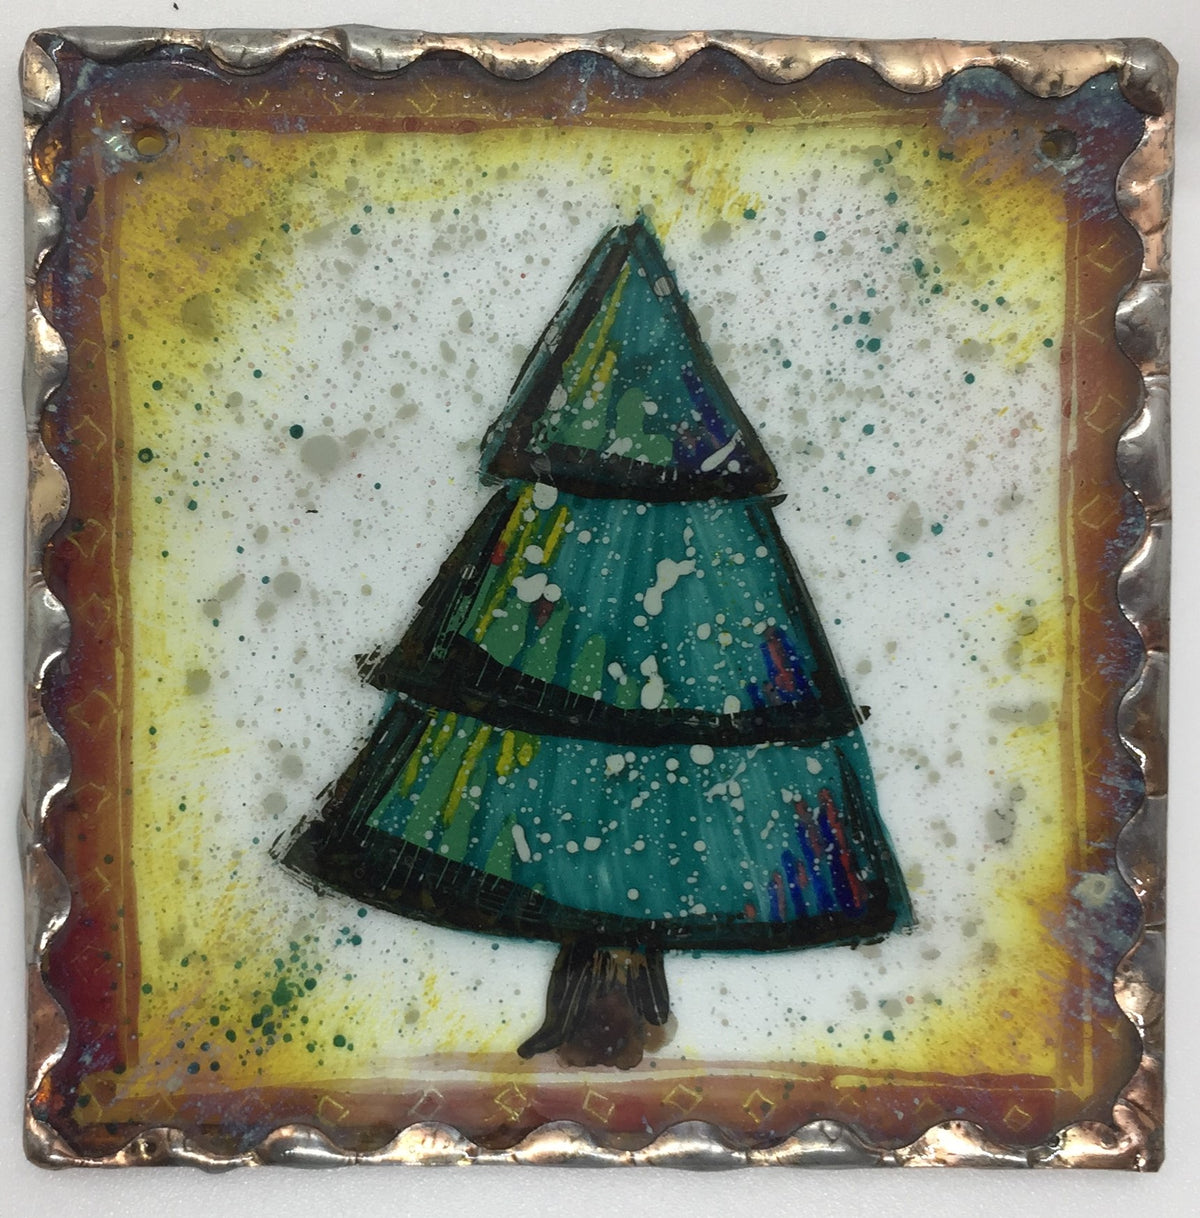 Xmas Tree 2, Painted Copper Foil glass by Bryan Smith